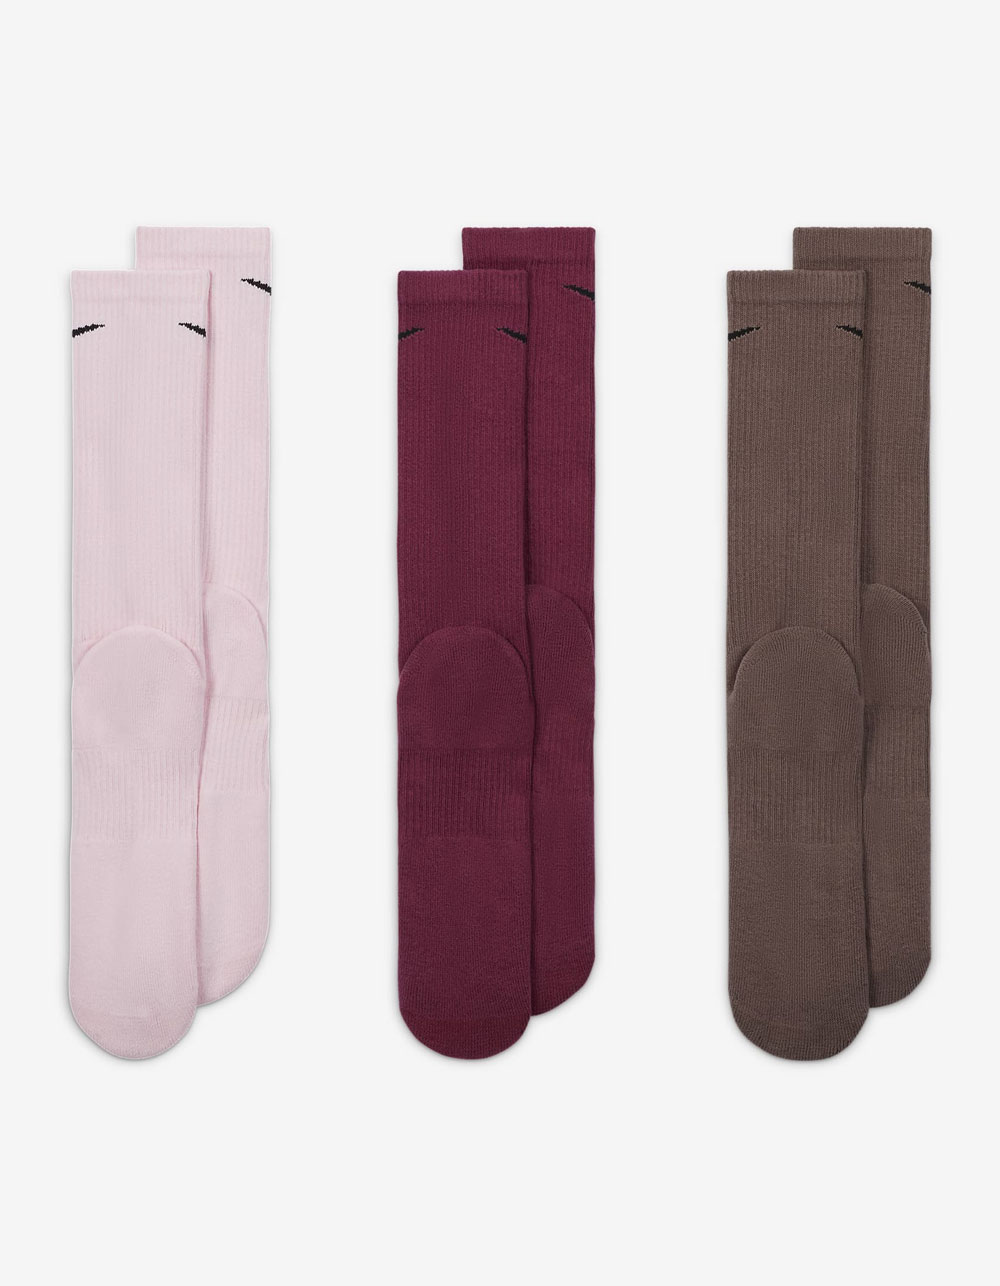 NIKE Everyday Plus Cushioned 3 Pack Crew Socks - PINK COMBO | Tillys